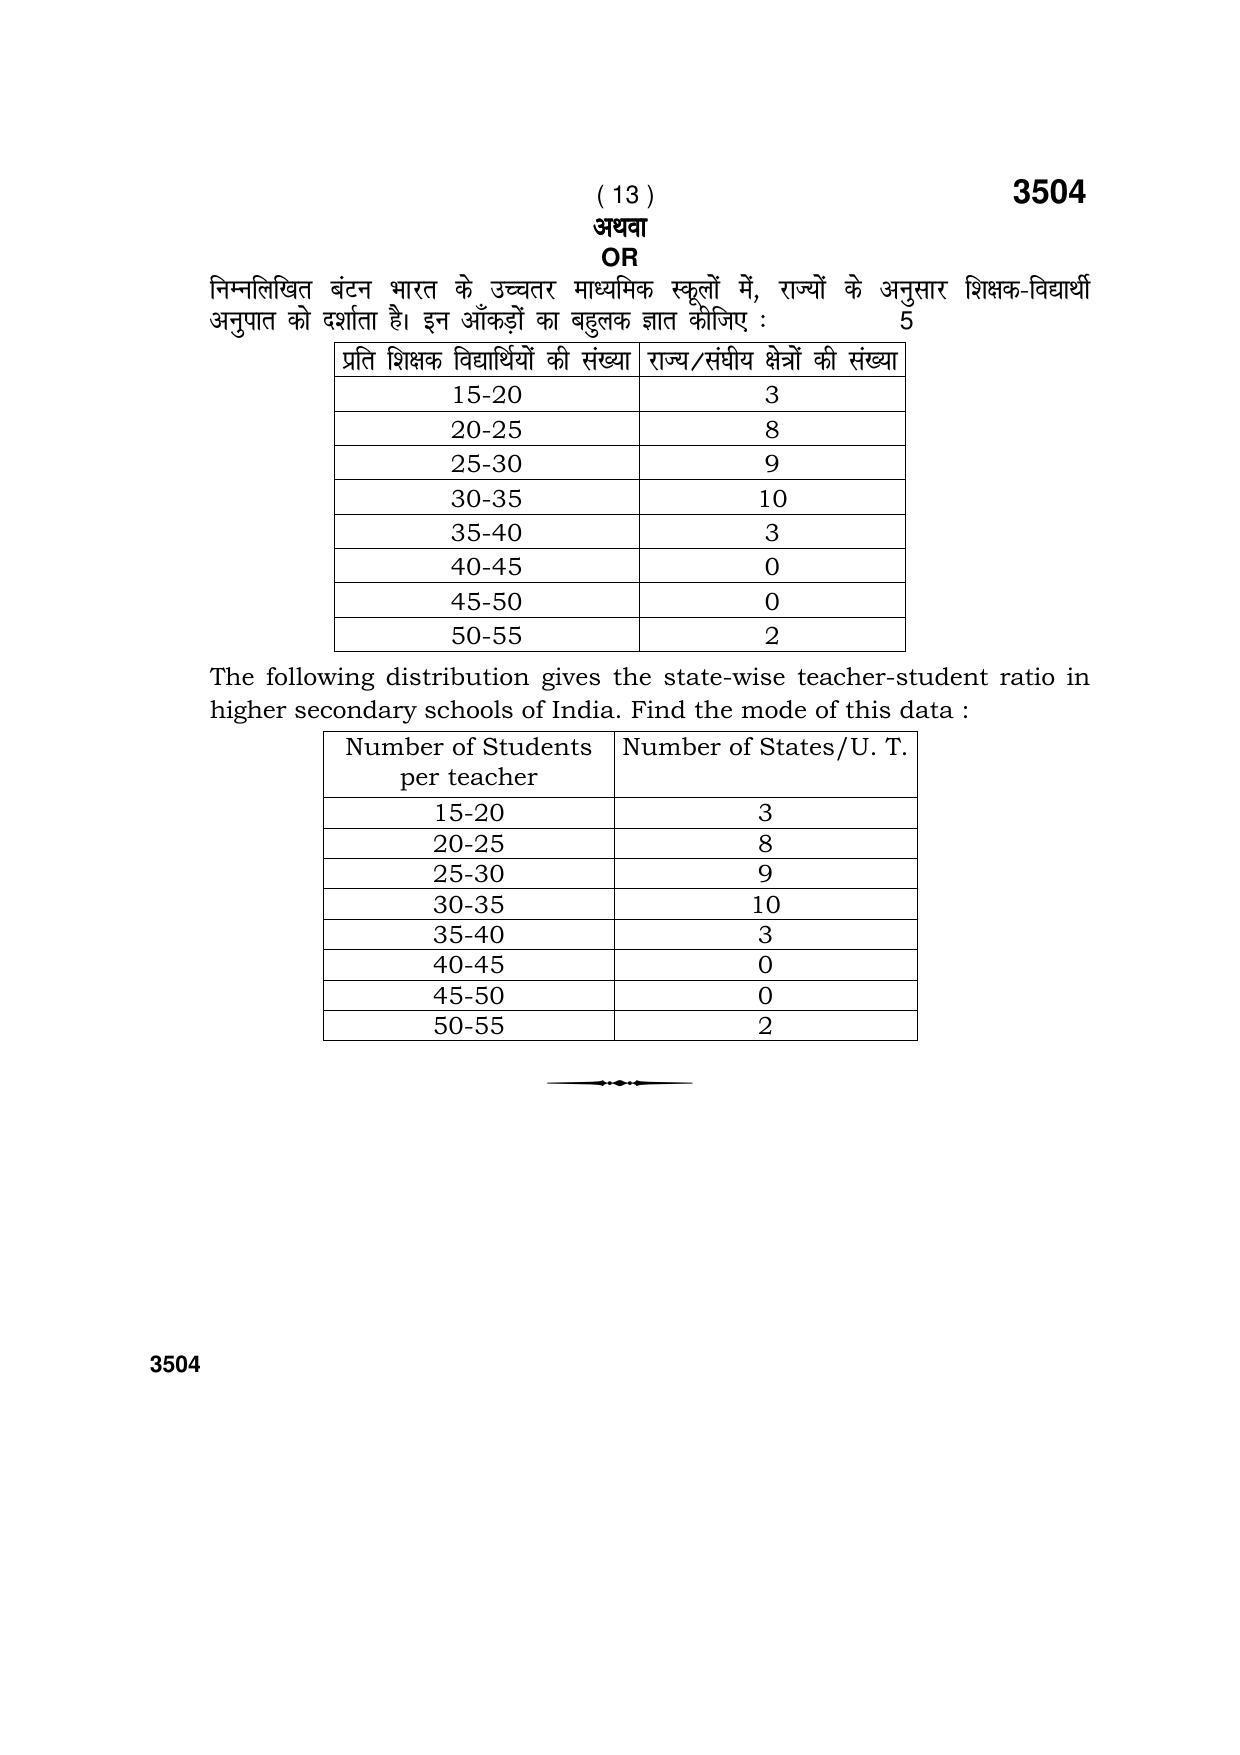 Haryana Board HBSE Class 10 Mathematics (Blind c) 2018 Question Paper - Page 13